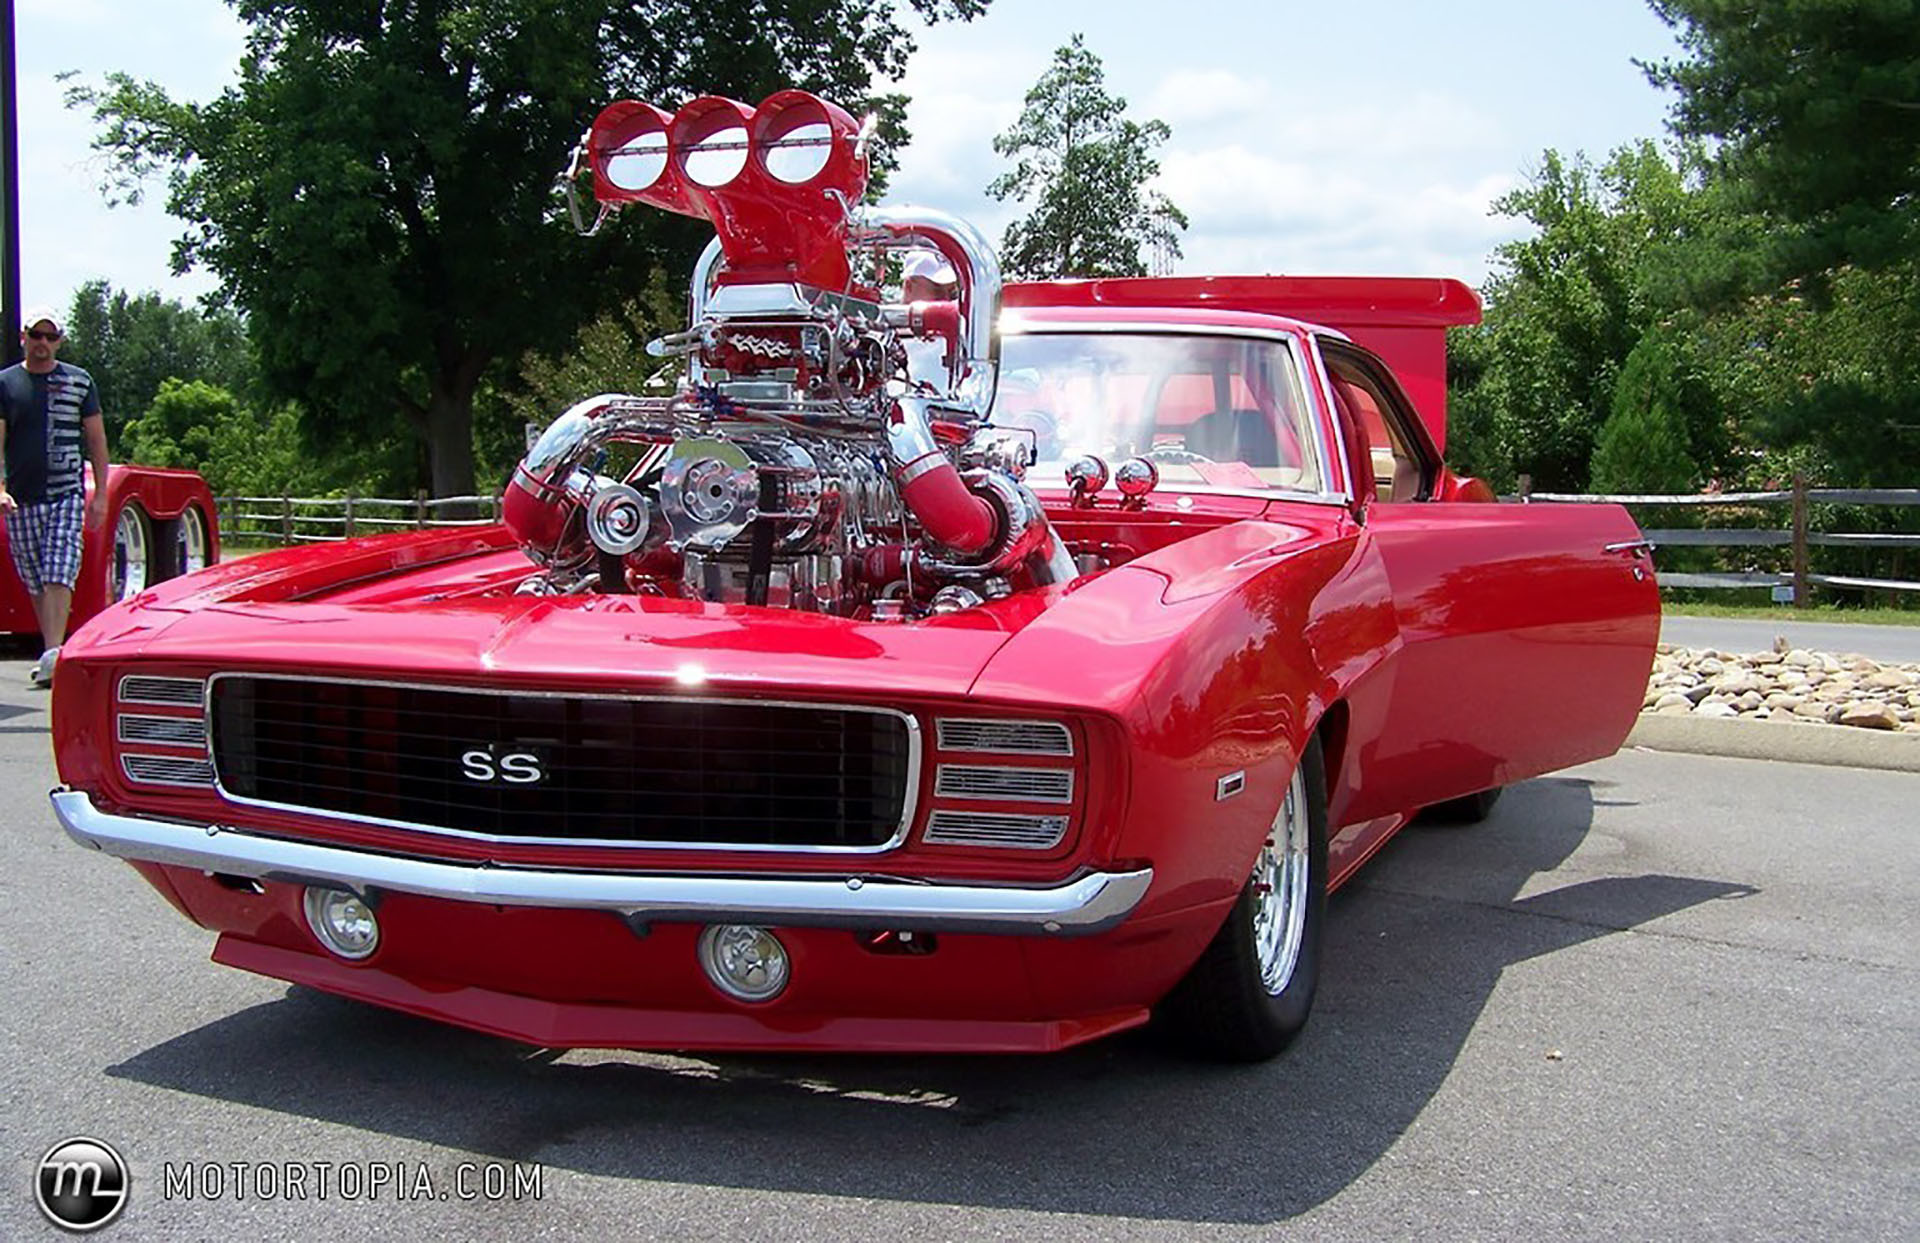 1920x1243 1969 Red Chevrolet Camaro SS Fast Car Picture HD Wallpaper